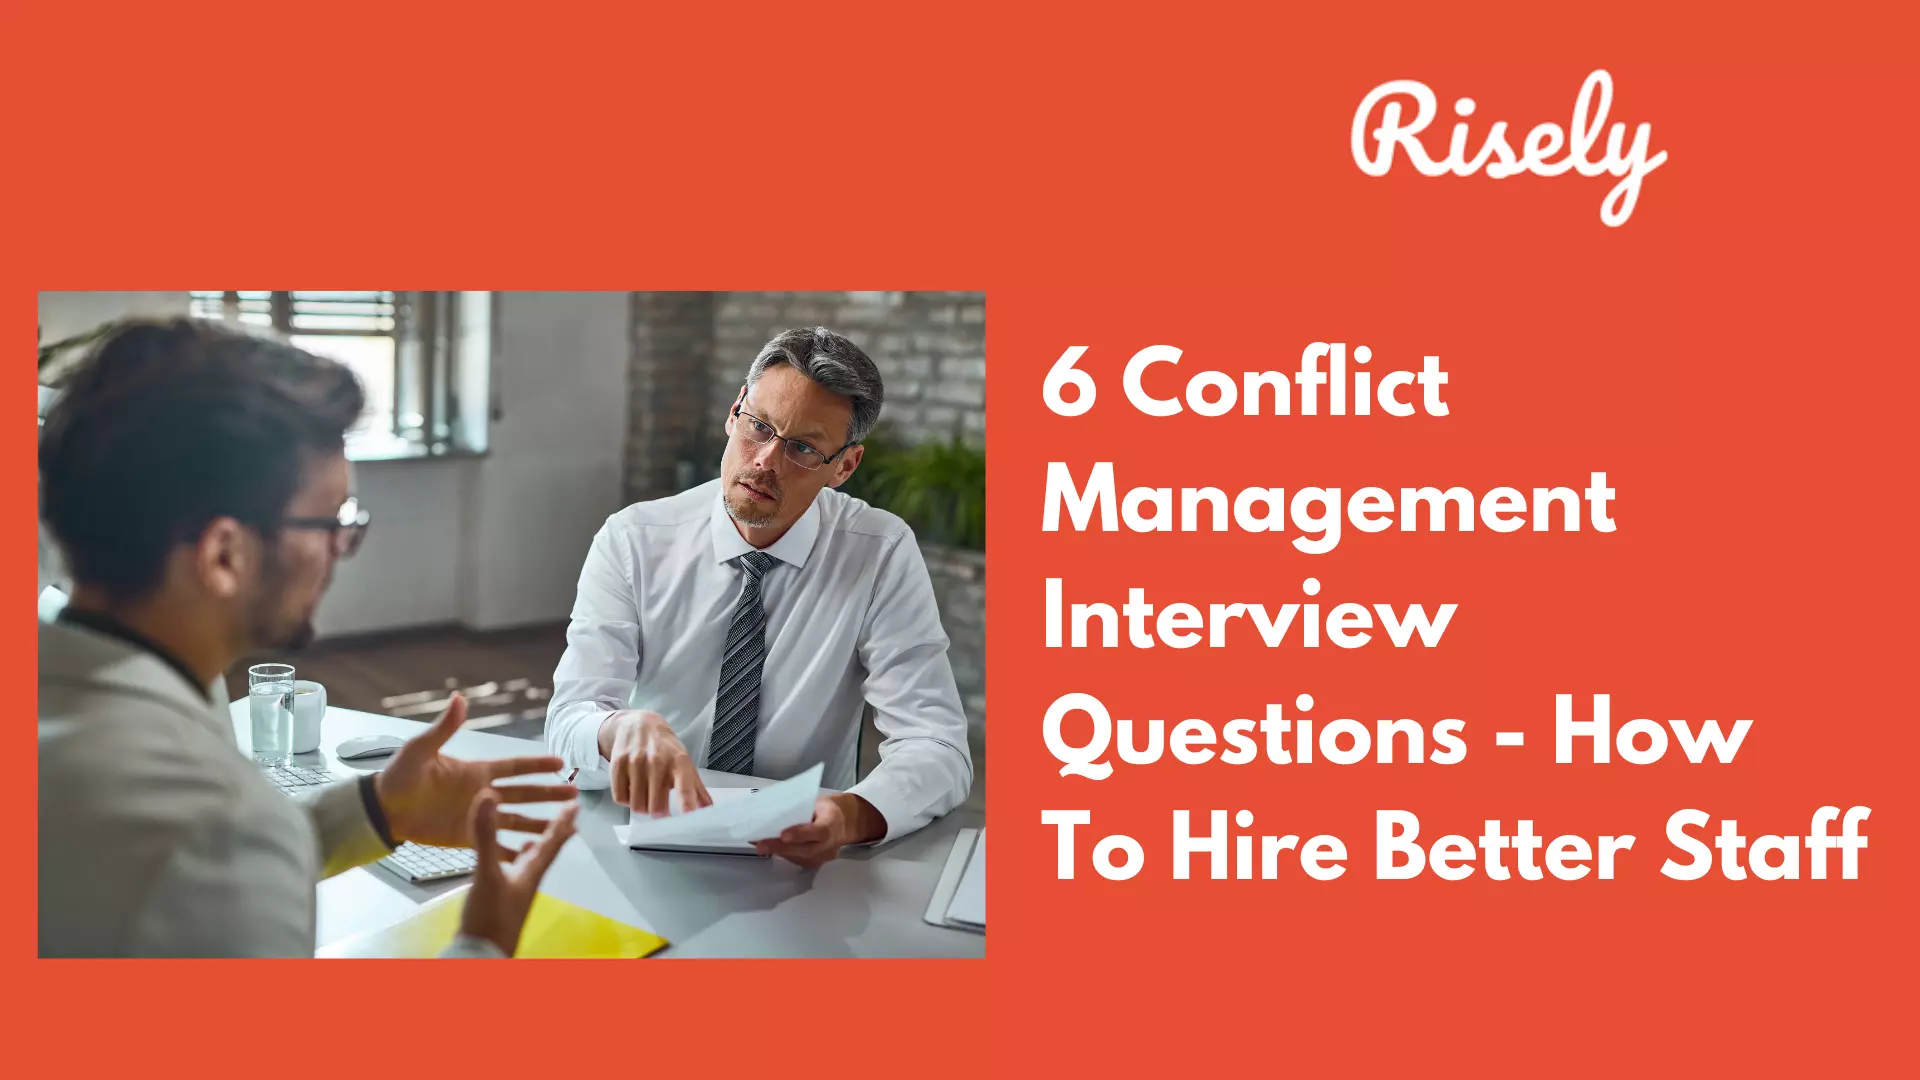 6 simple conflict management interview questions managers can ask